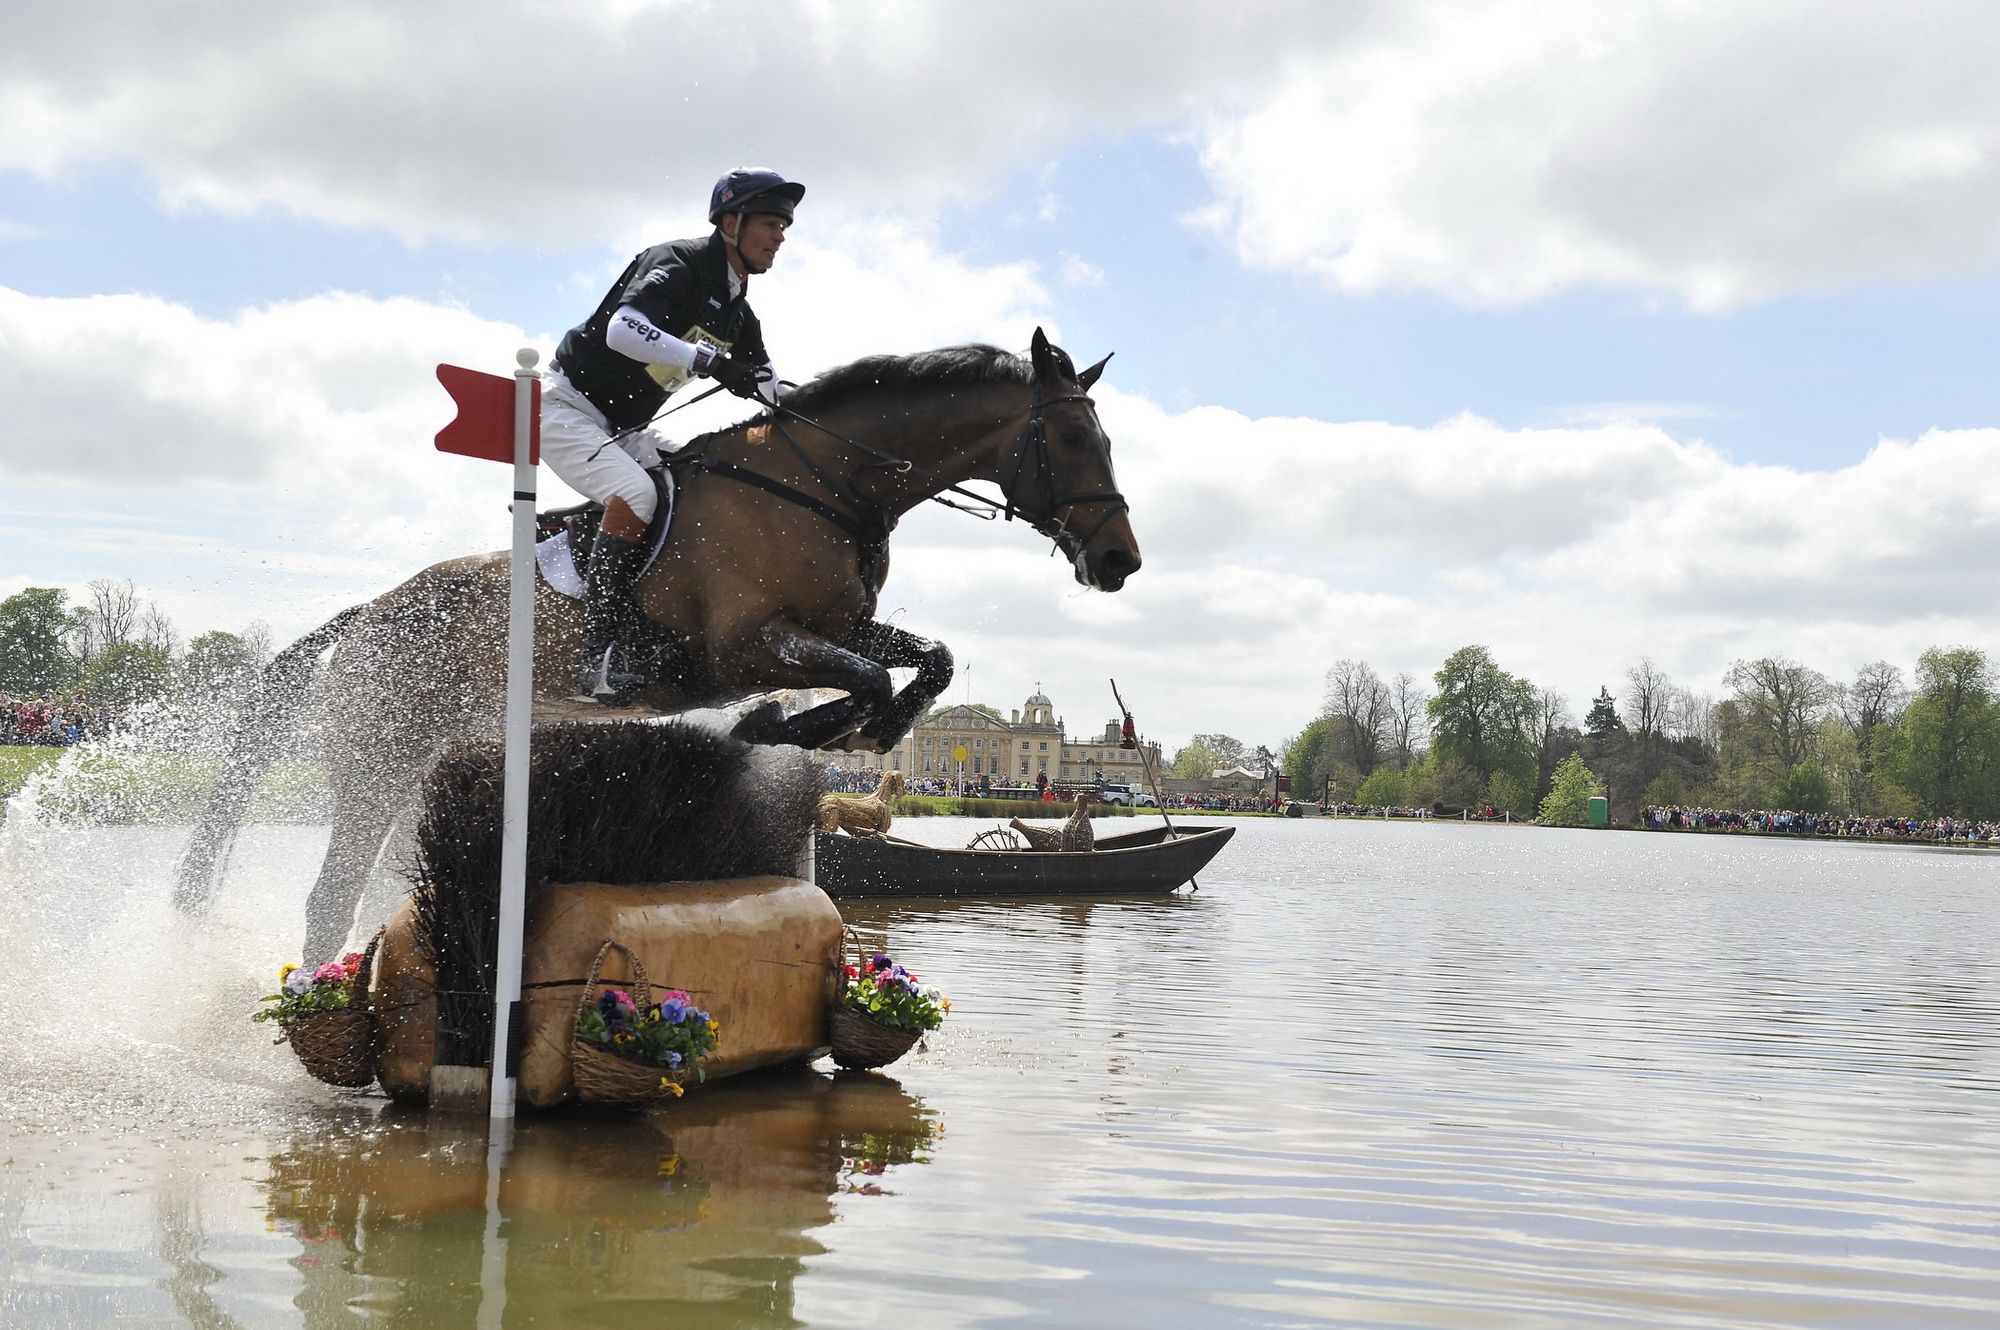 FEI Classics™ Stage is set for a new-look Badminton